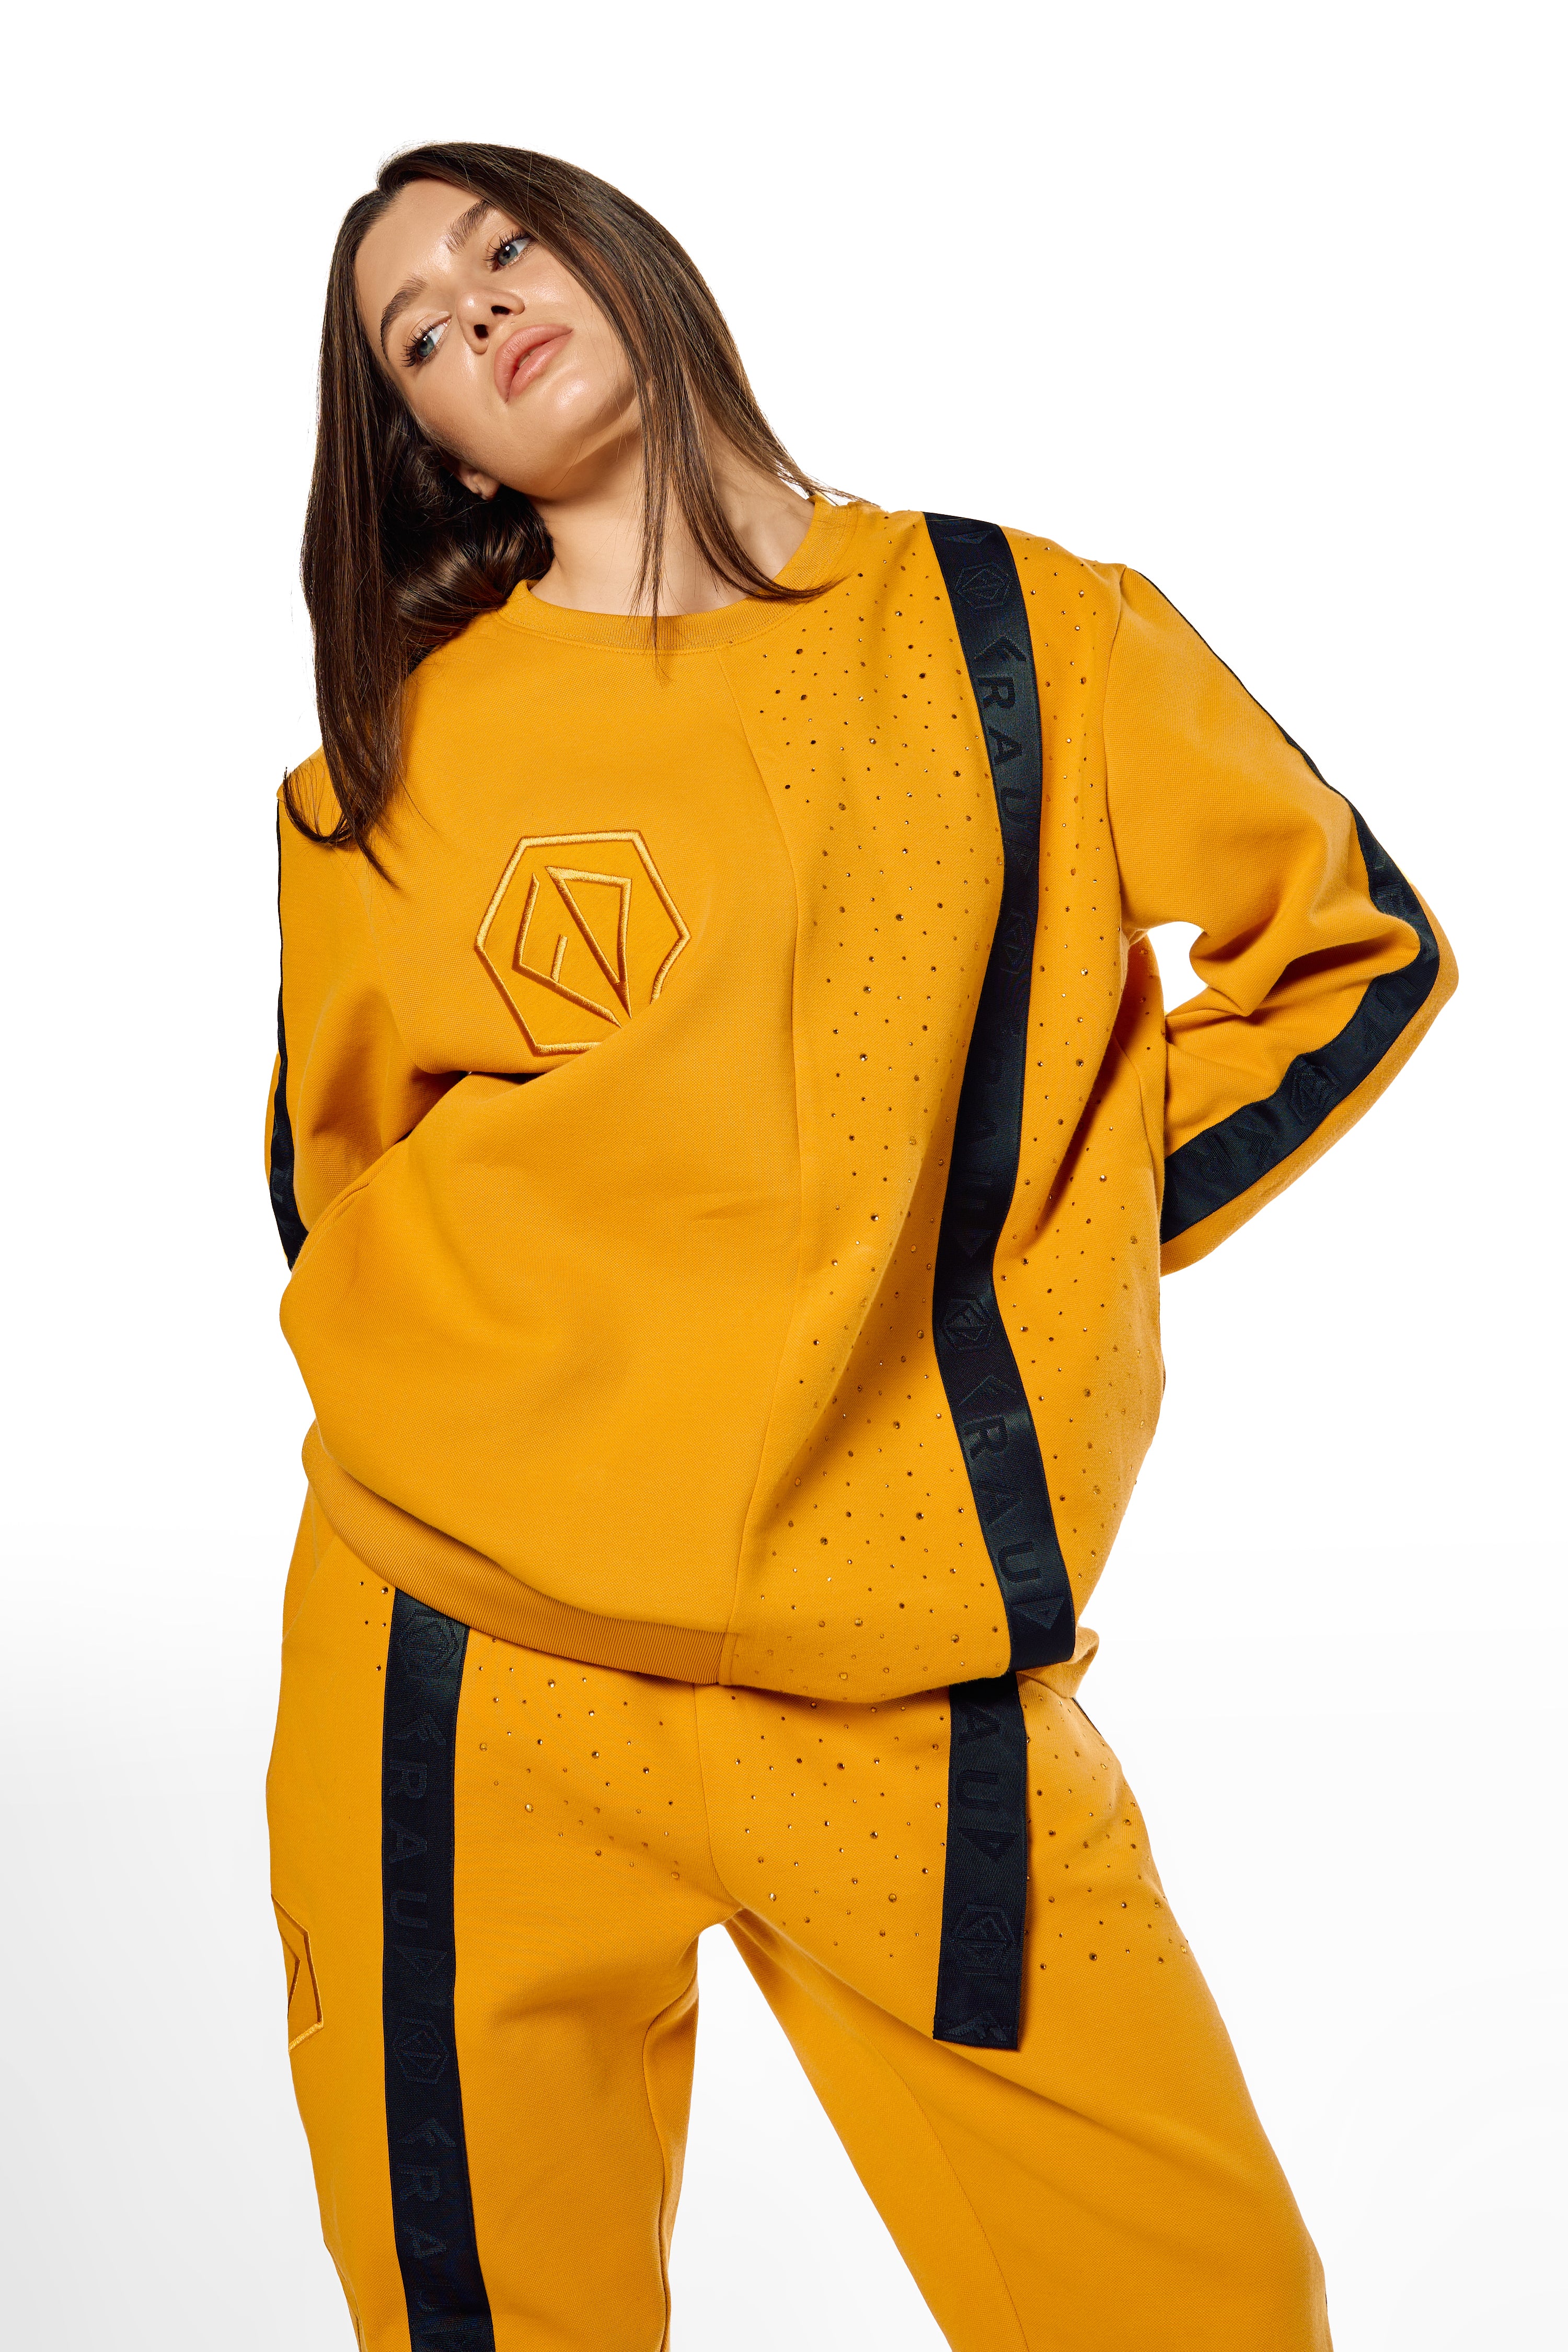 Oversized, comfortable and loose fitting golden olive branch color sport set